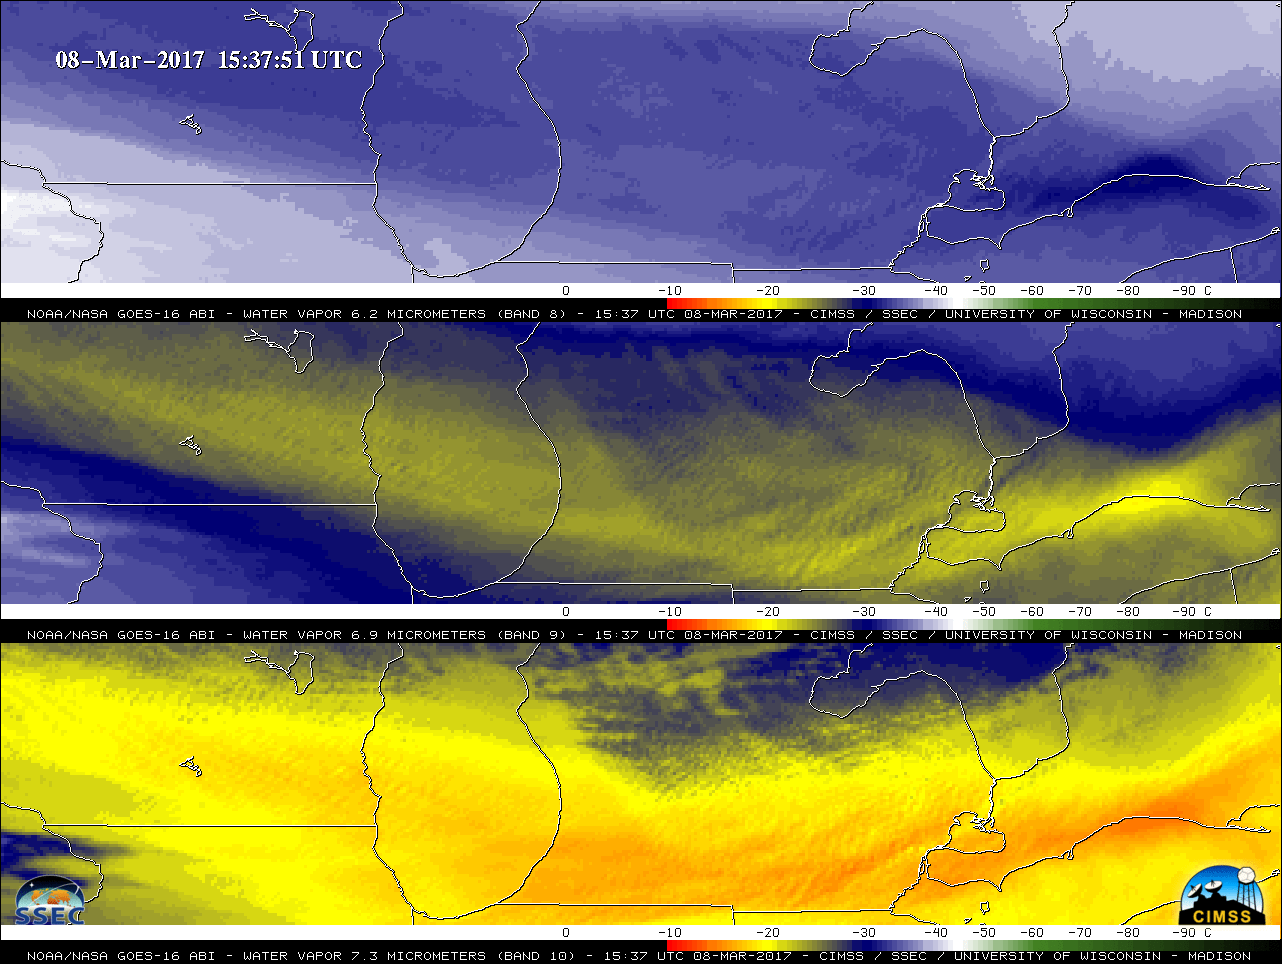 GOES-16 Water Vapor images: 6.2 µm (top), 6.9 µm (middle) and 7.4 µm (bottom) [click to play animation]